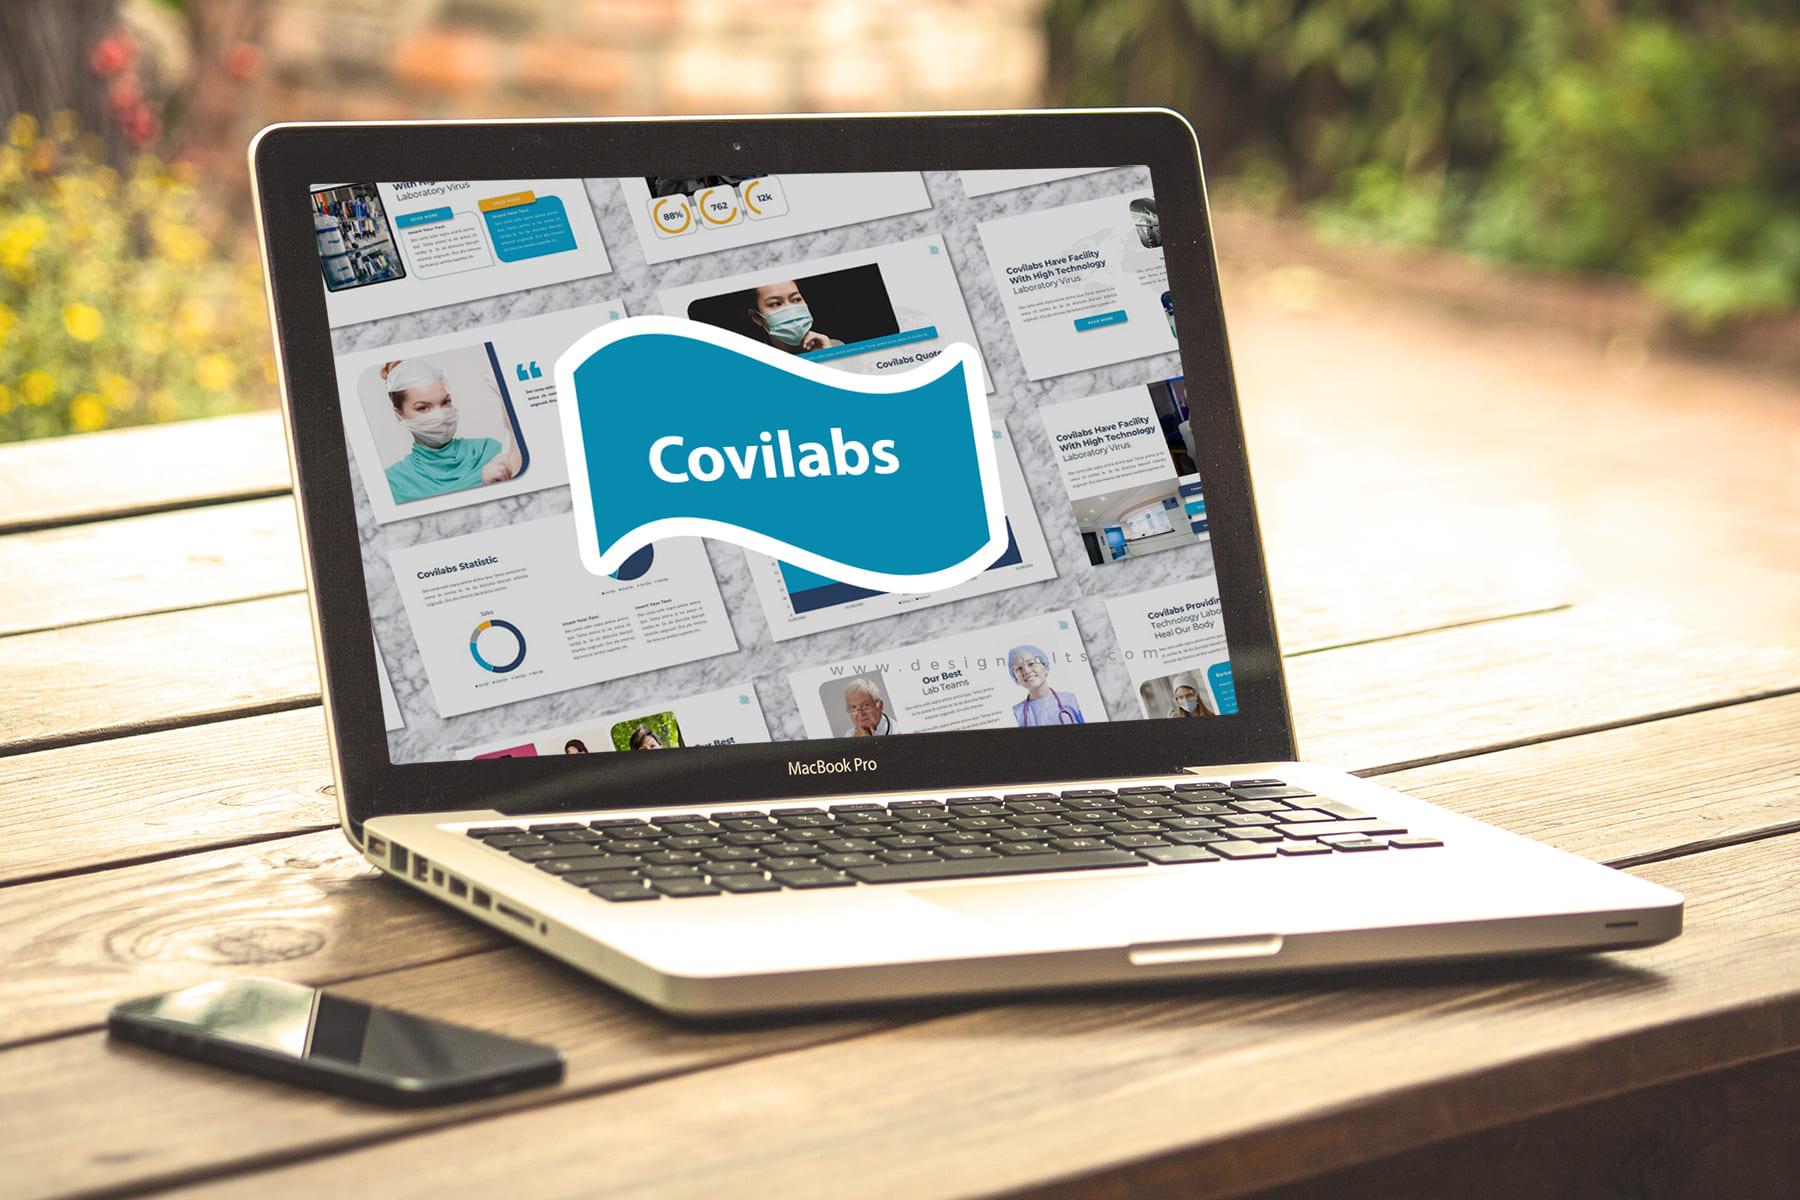 Covilabs - Covid Medical Powerpoint by MasterBundles notebook preview mockup image.